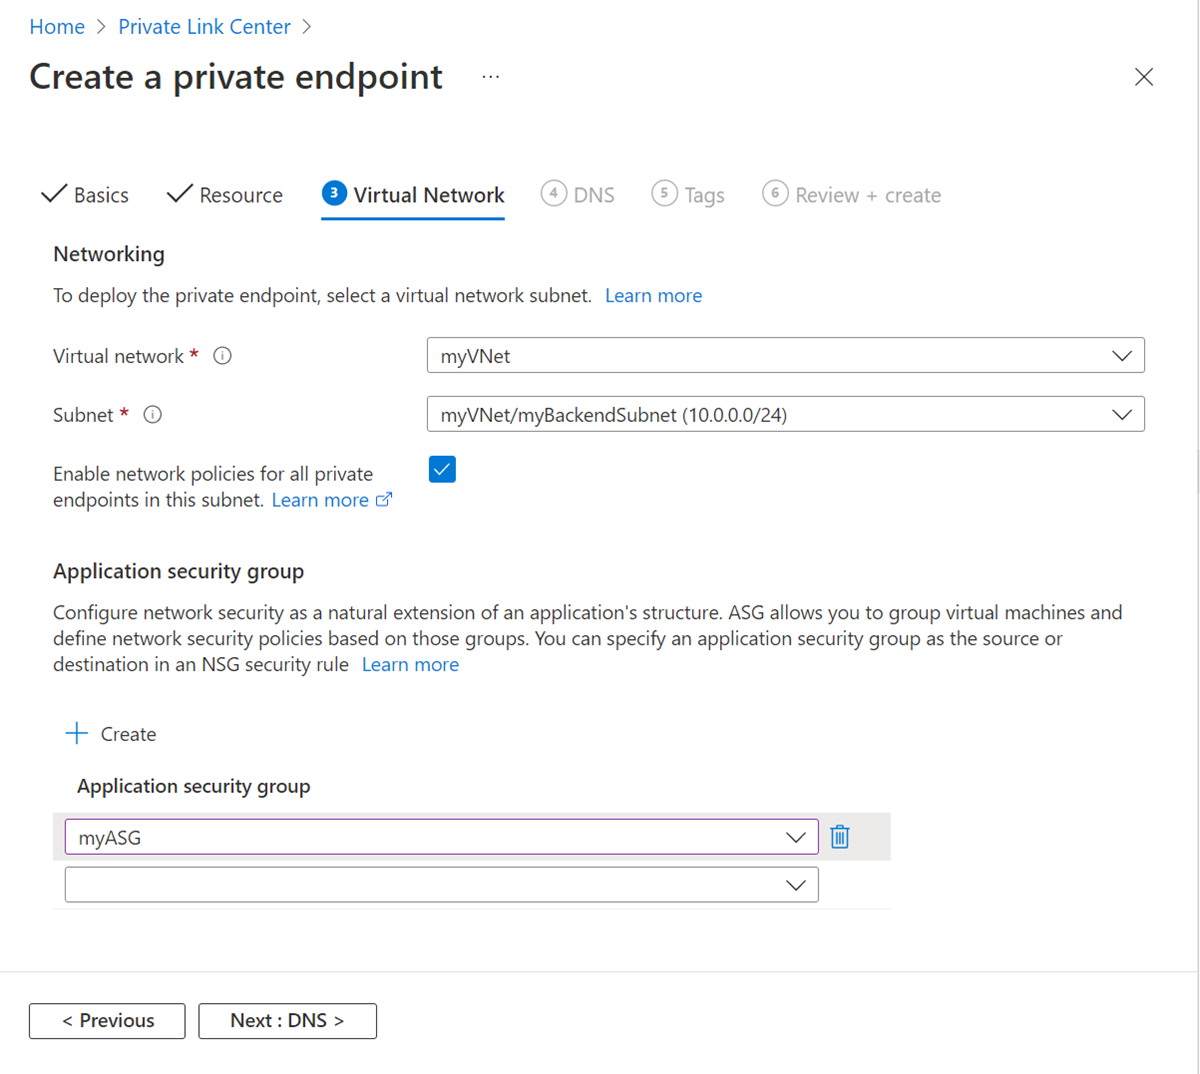 Screenshot that shows ASG selection when creating a new private endpoint.